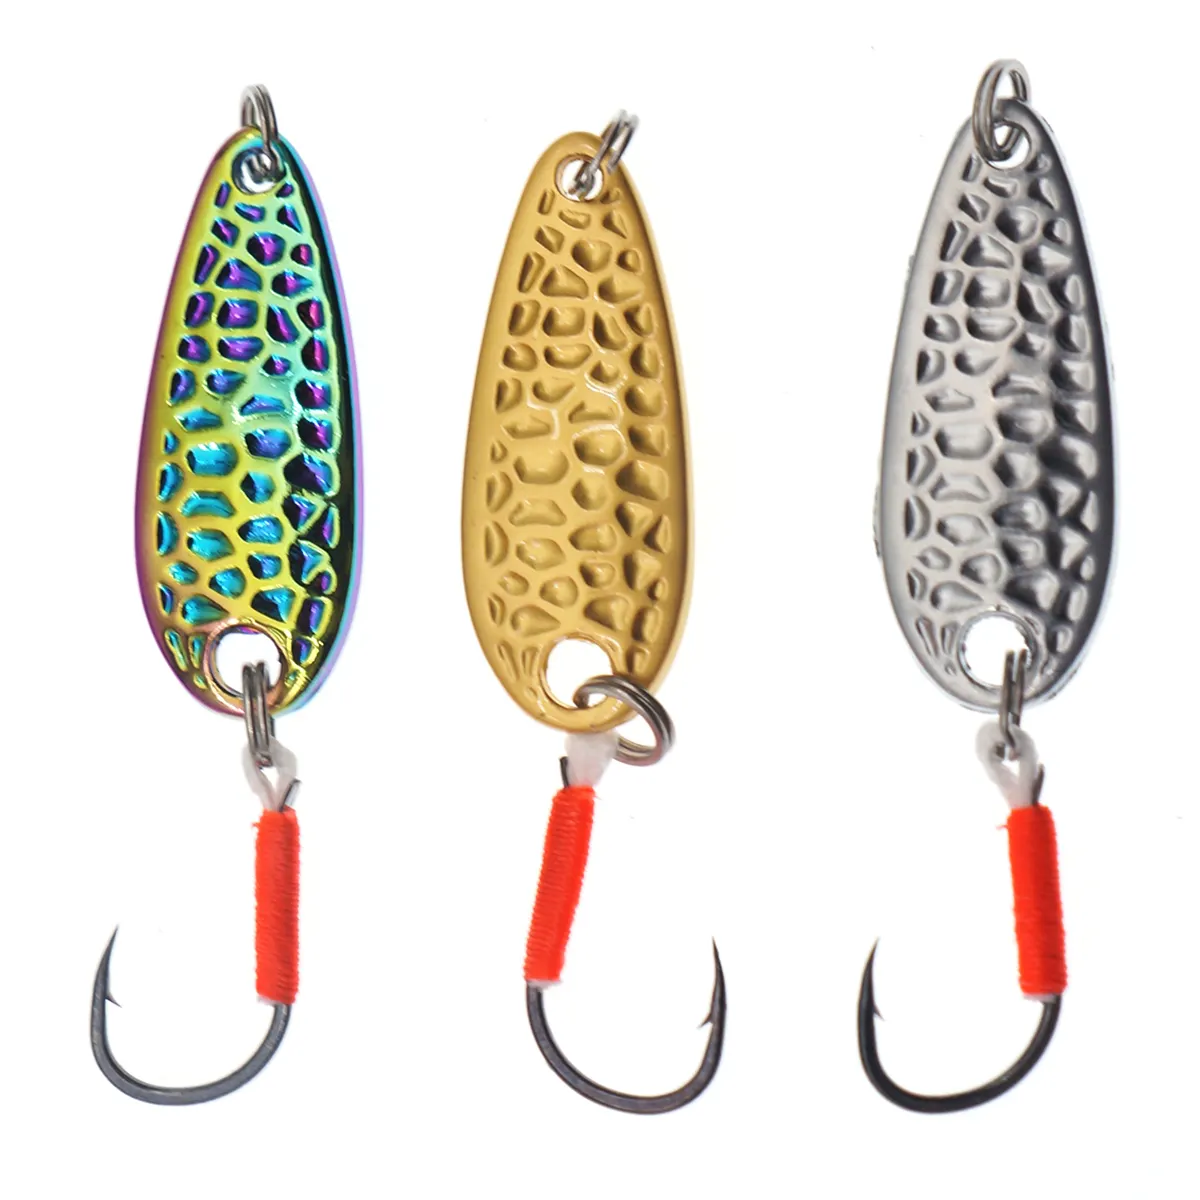 Fishing Lures Spinner Baits Bass Tackle Trout Spoon Metal 2.5g 3.5g 5g OPP Bag OEM ODM Mini Stream Iron Artificial Hard Bait